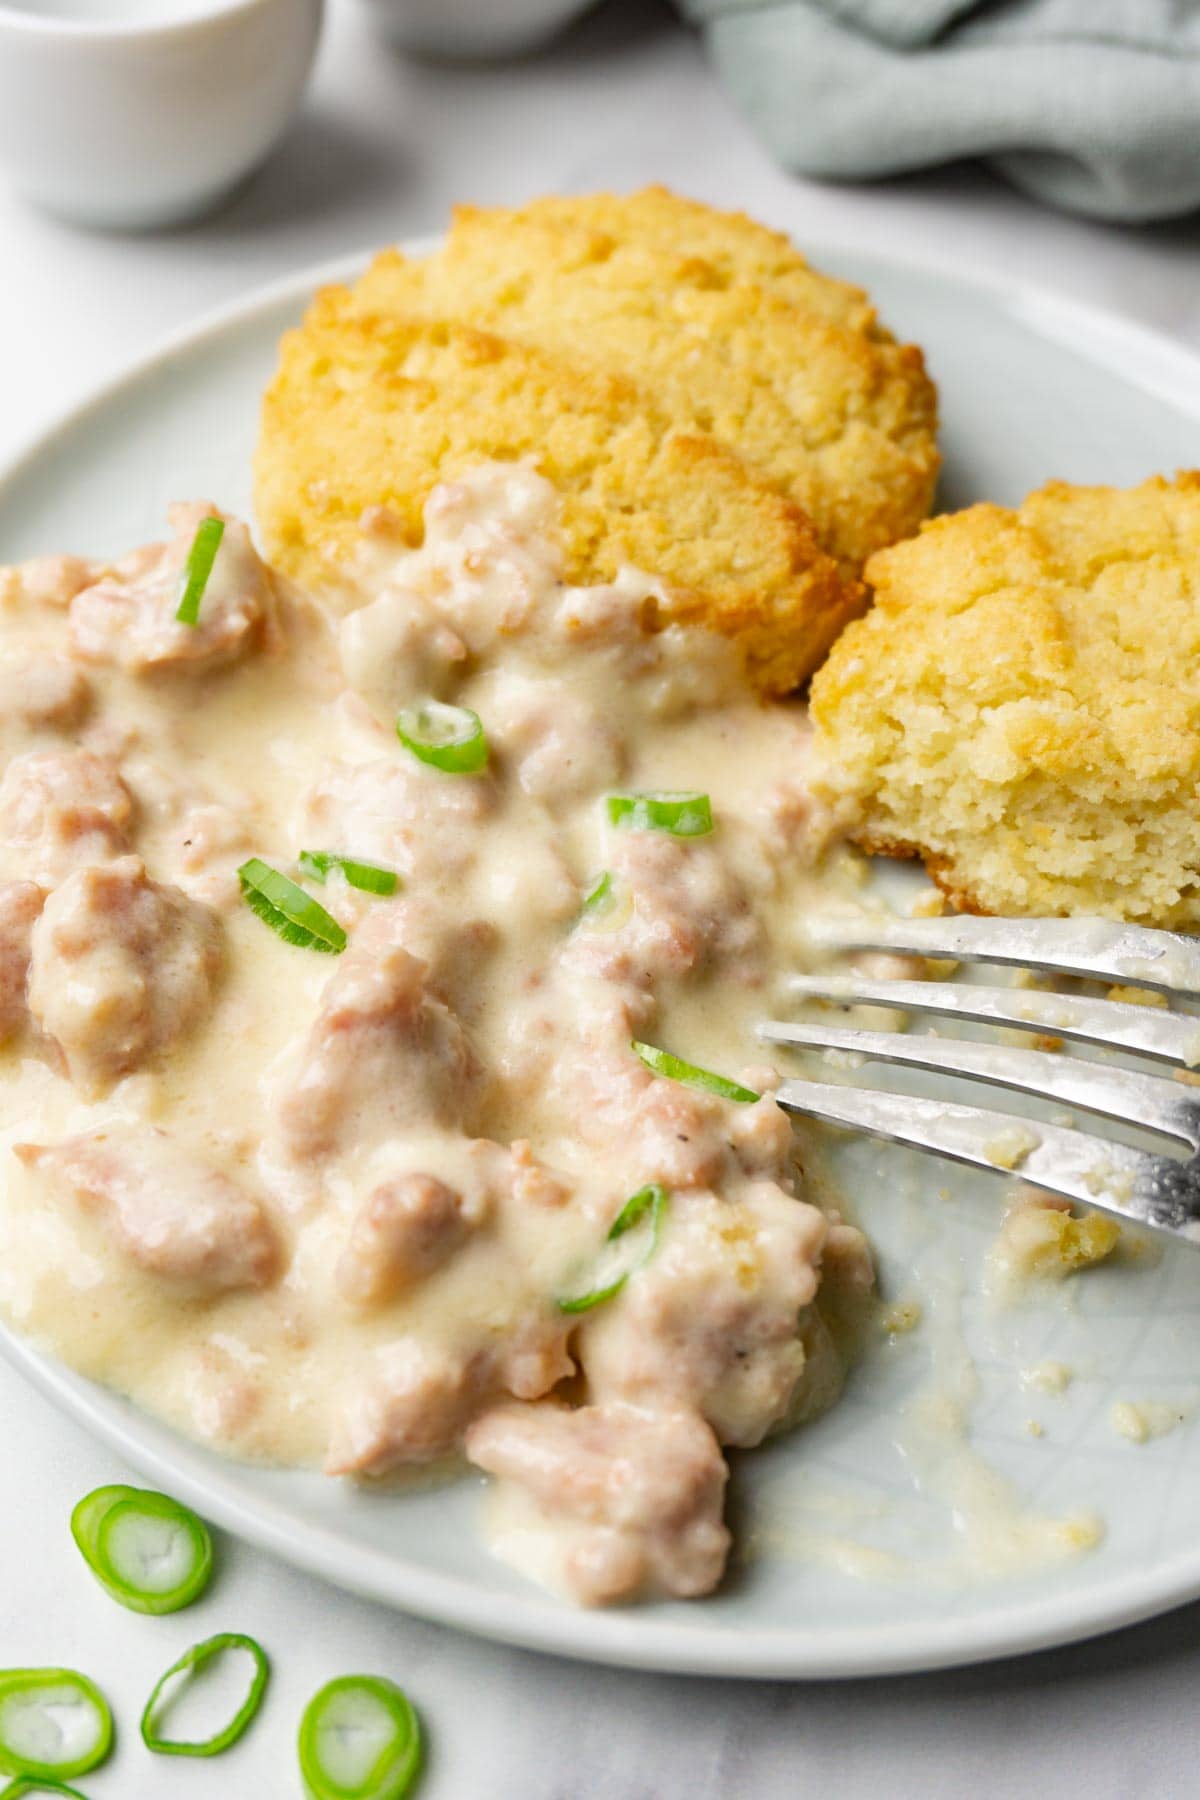 Biscuits and sausage gravy on a plate, one bite taken from one of the biscuits with some gravy.